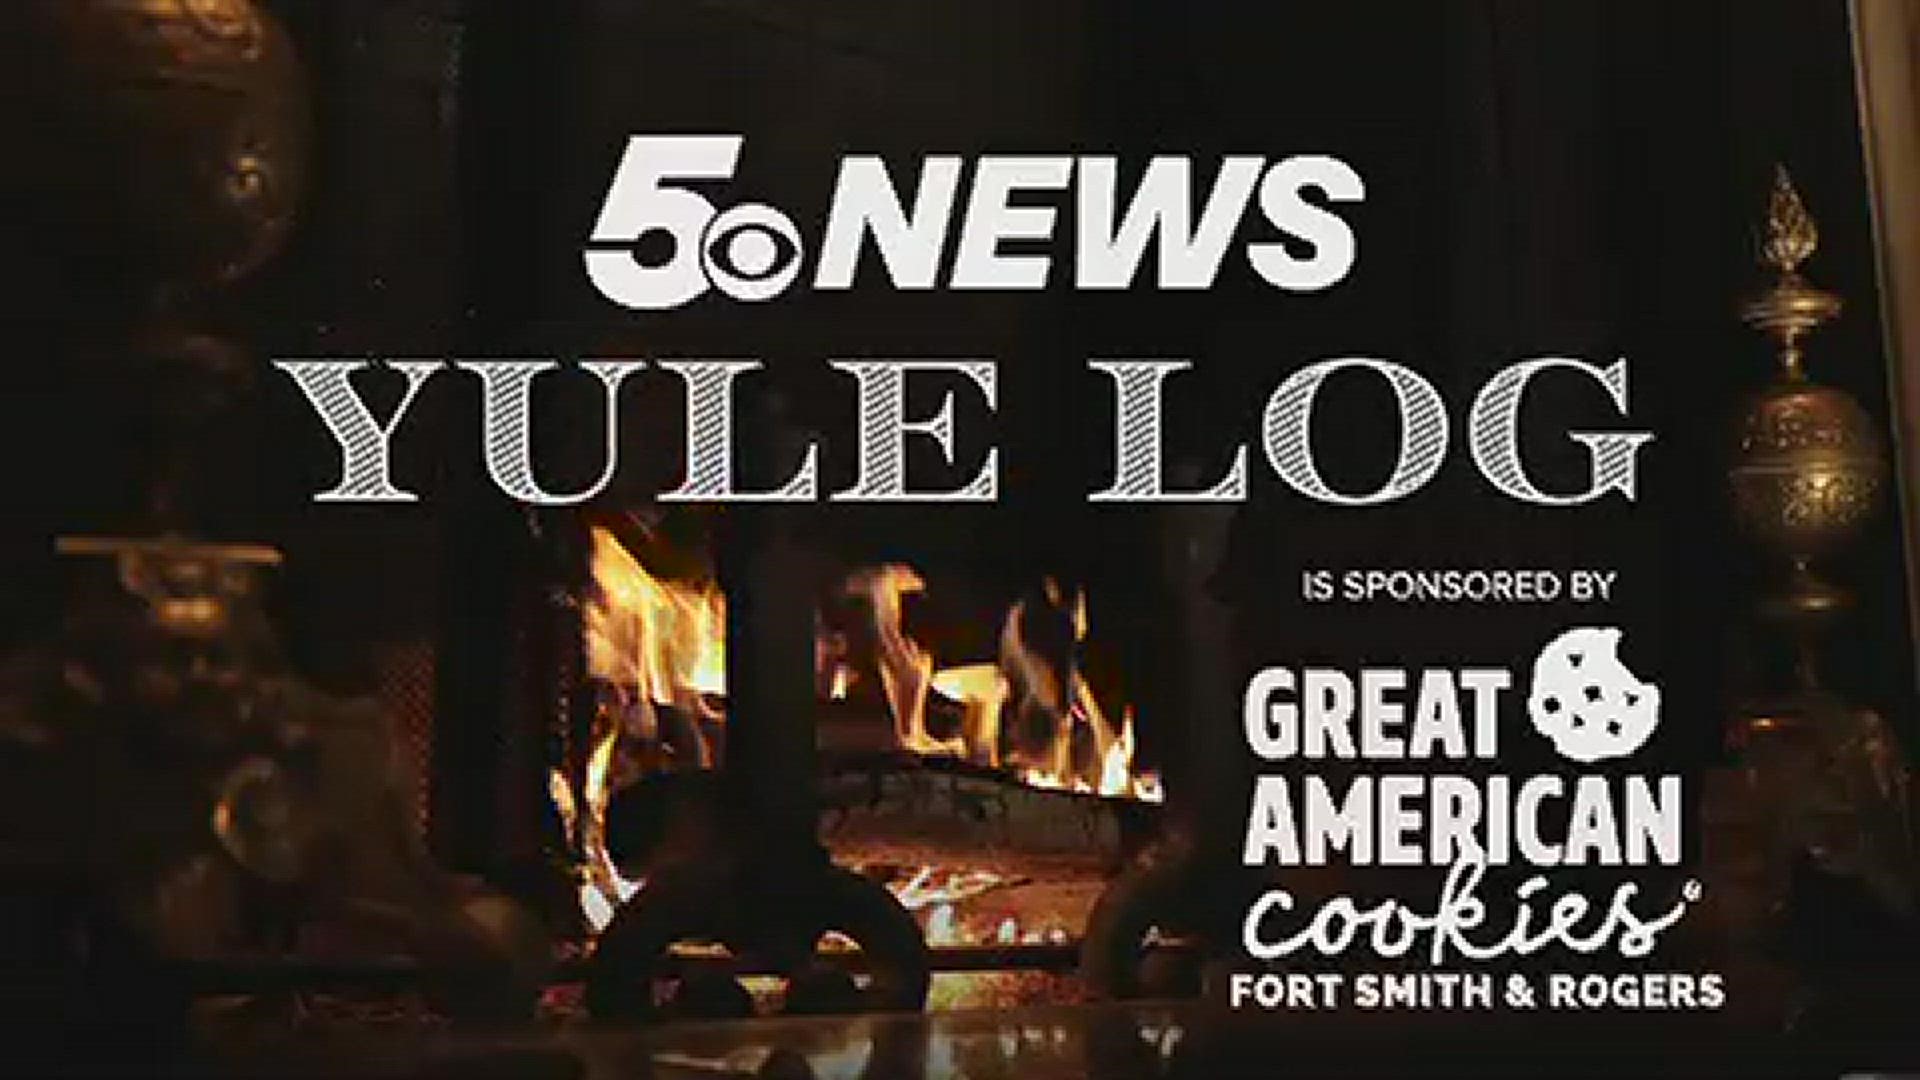 Merry Christmas! Enjoy the yule log and Christmas story readings from the 5NEWS Team.